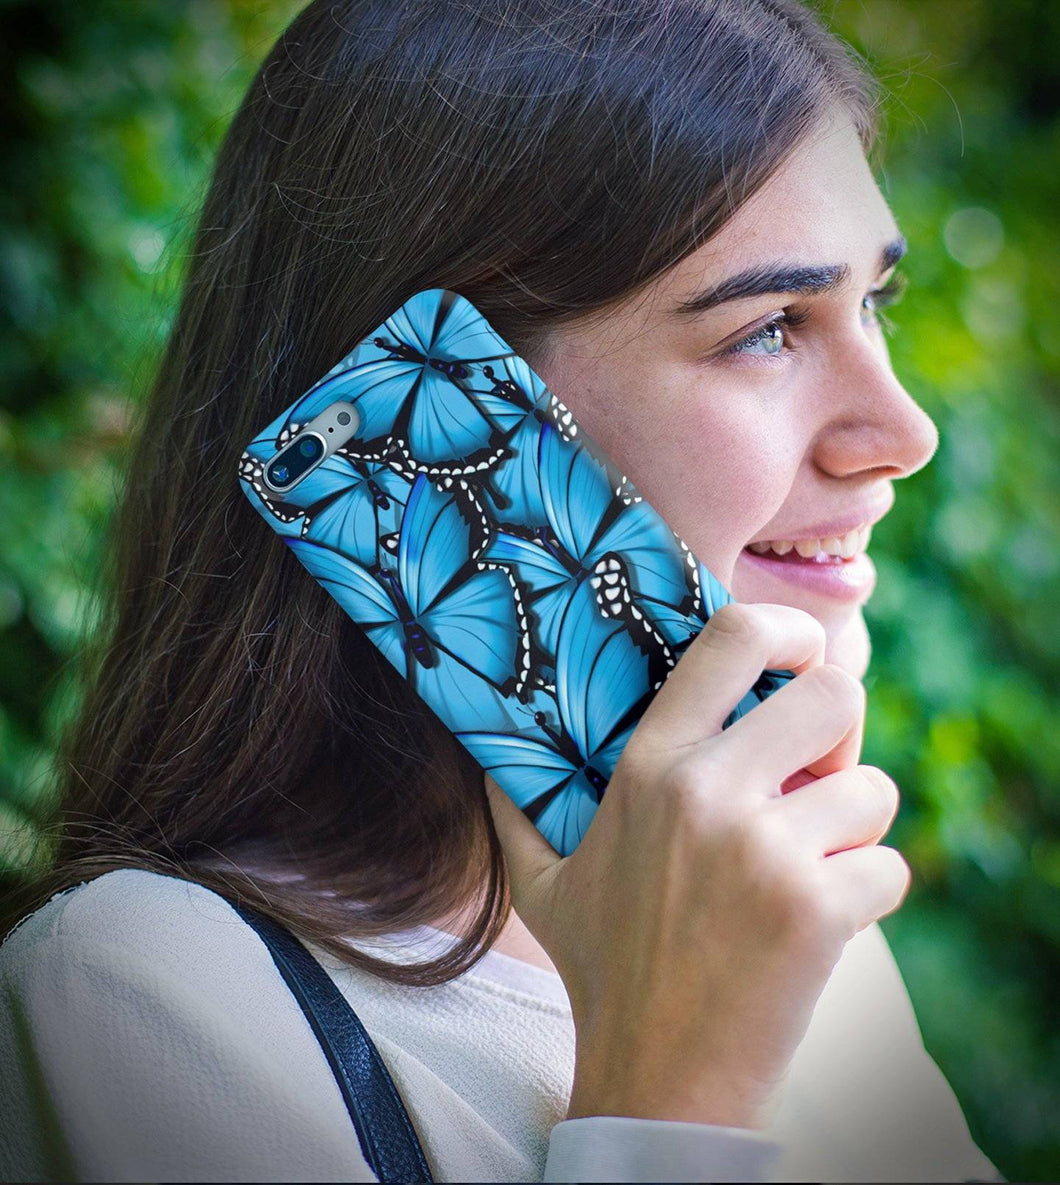 Blue Butterfly iPhone Case